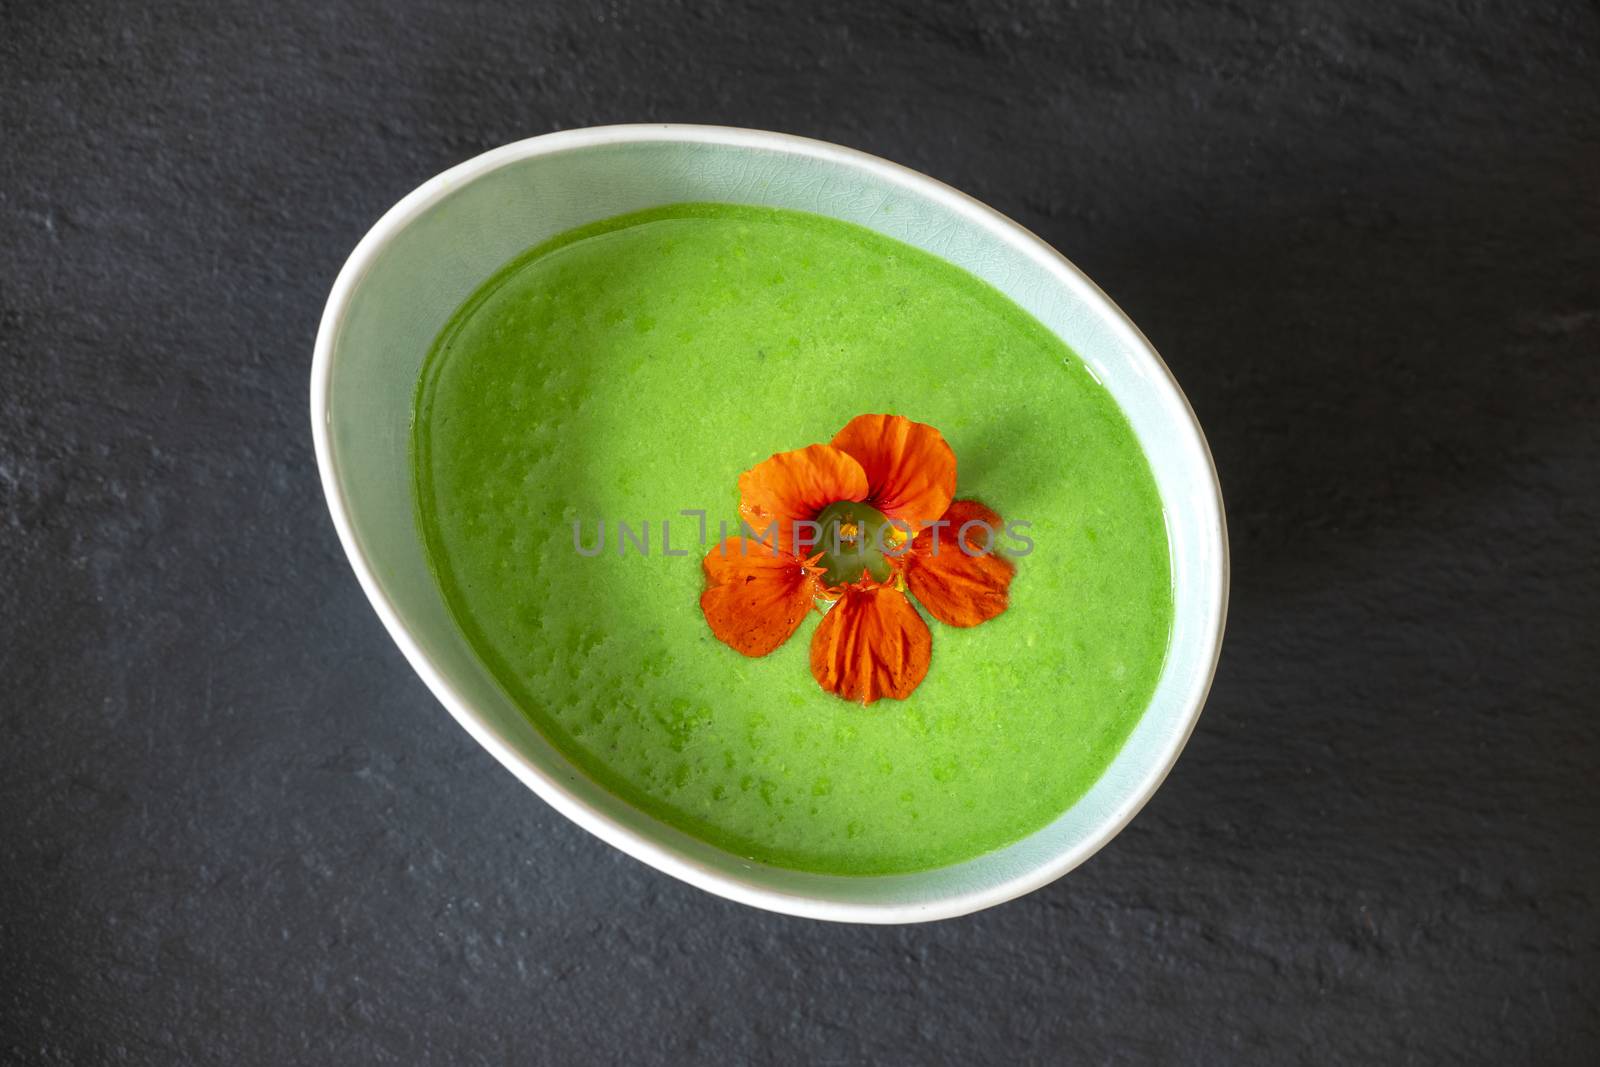 pea soup by bernjuer